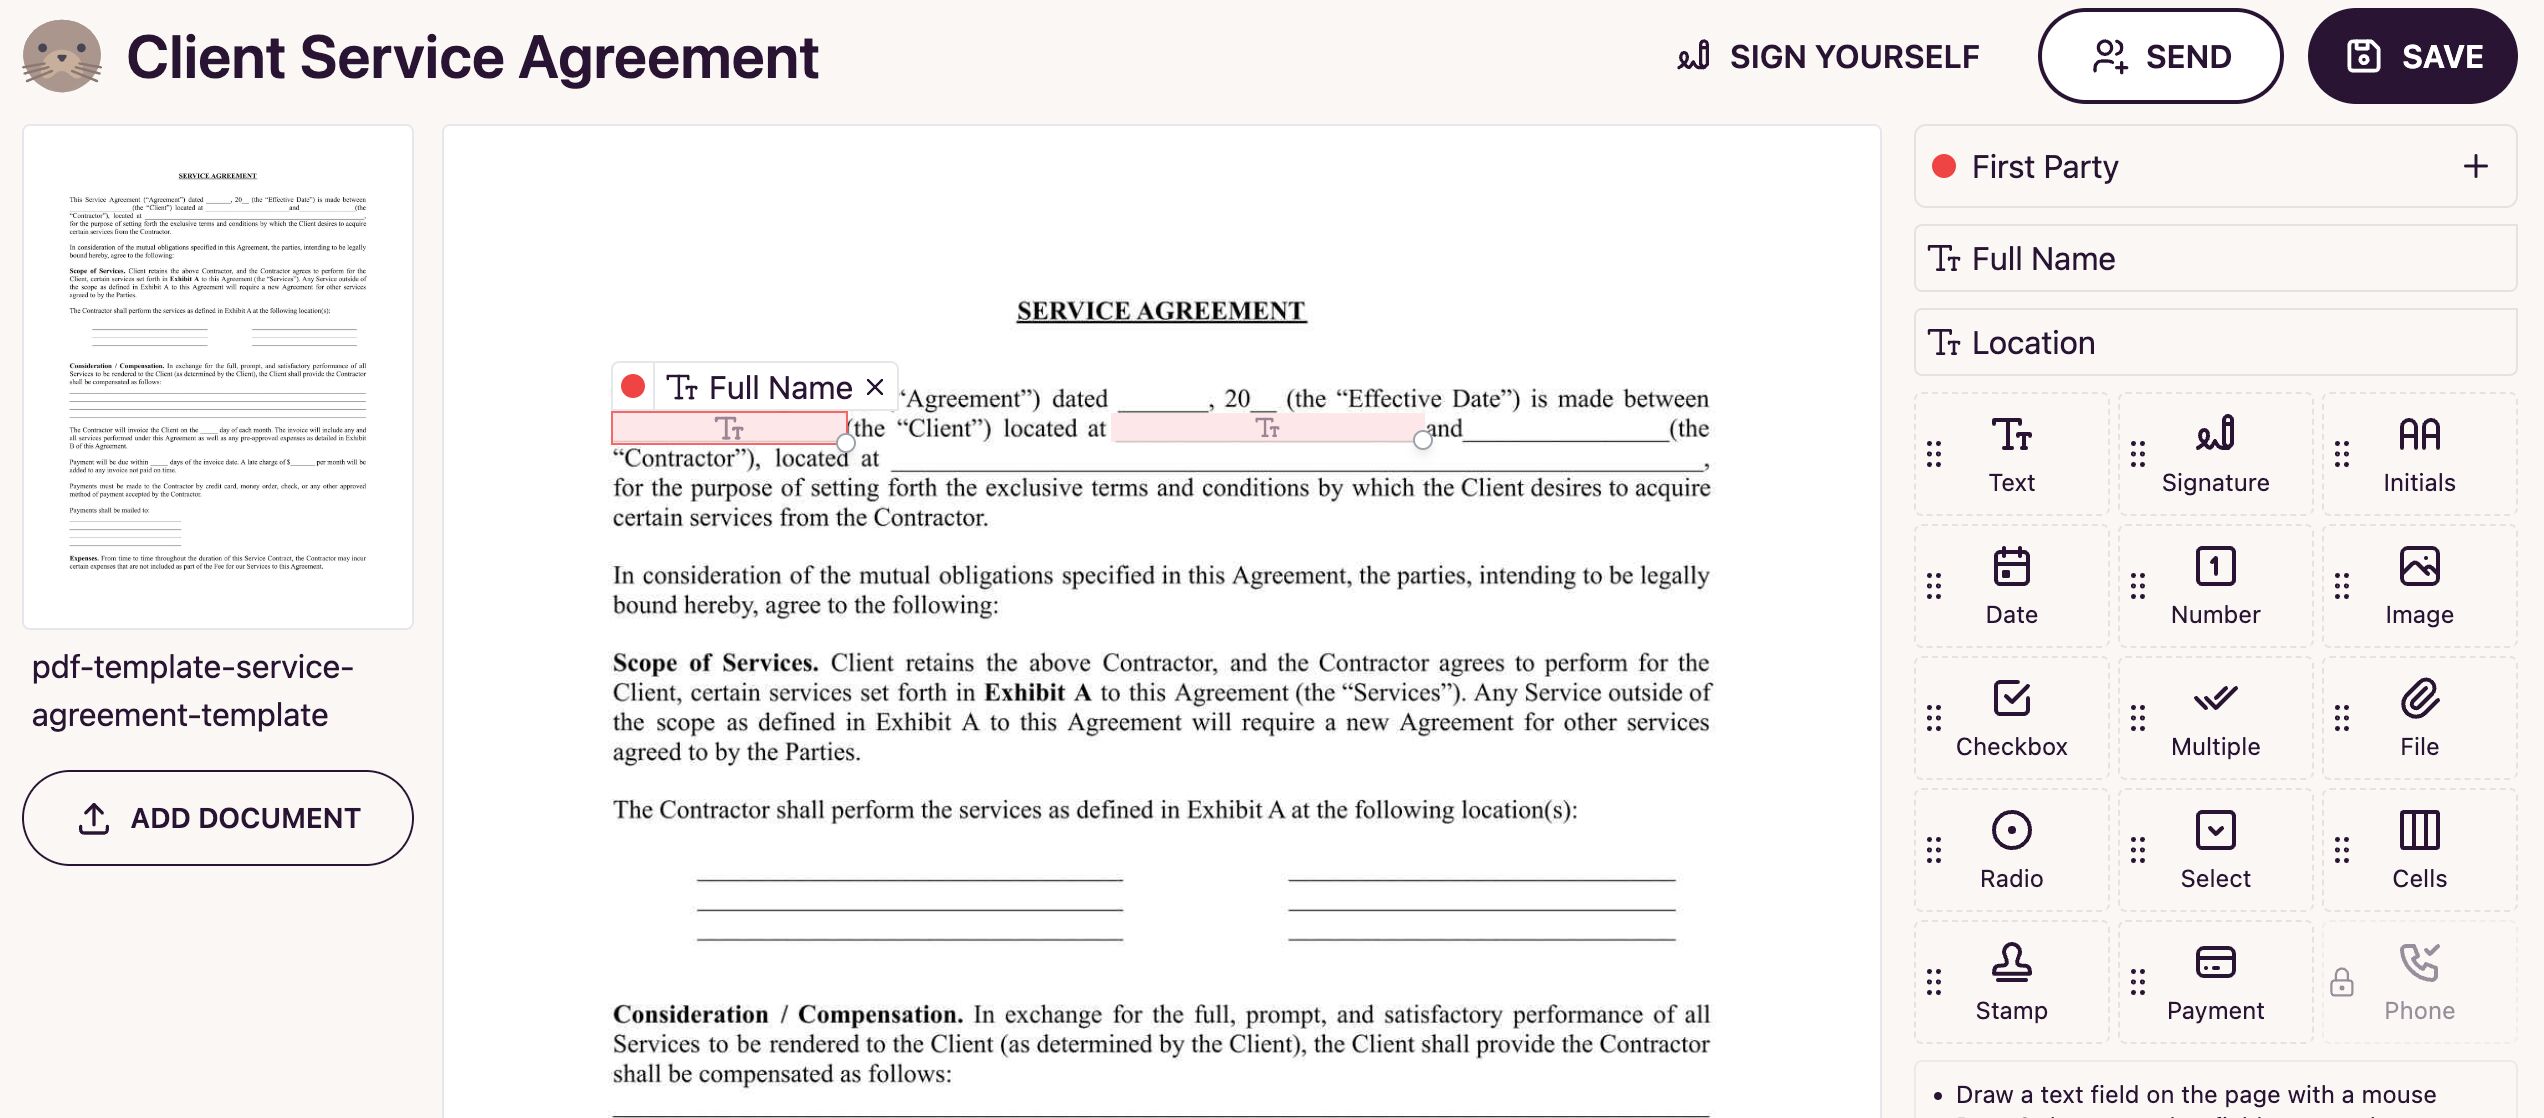 Client Service Agreement Template Form